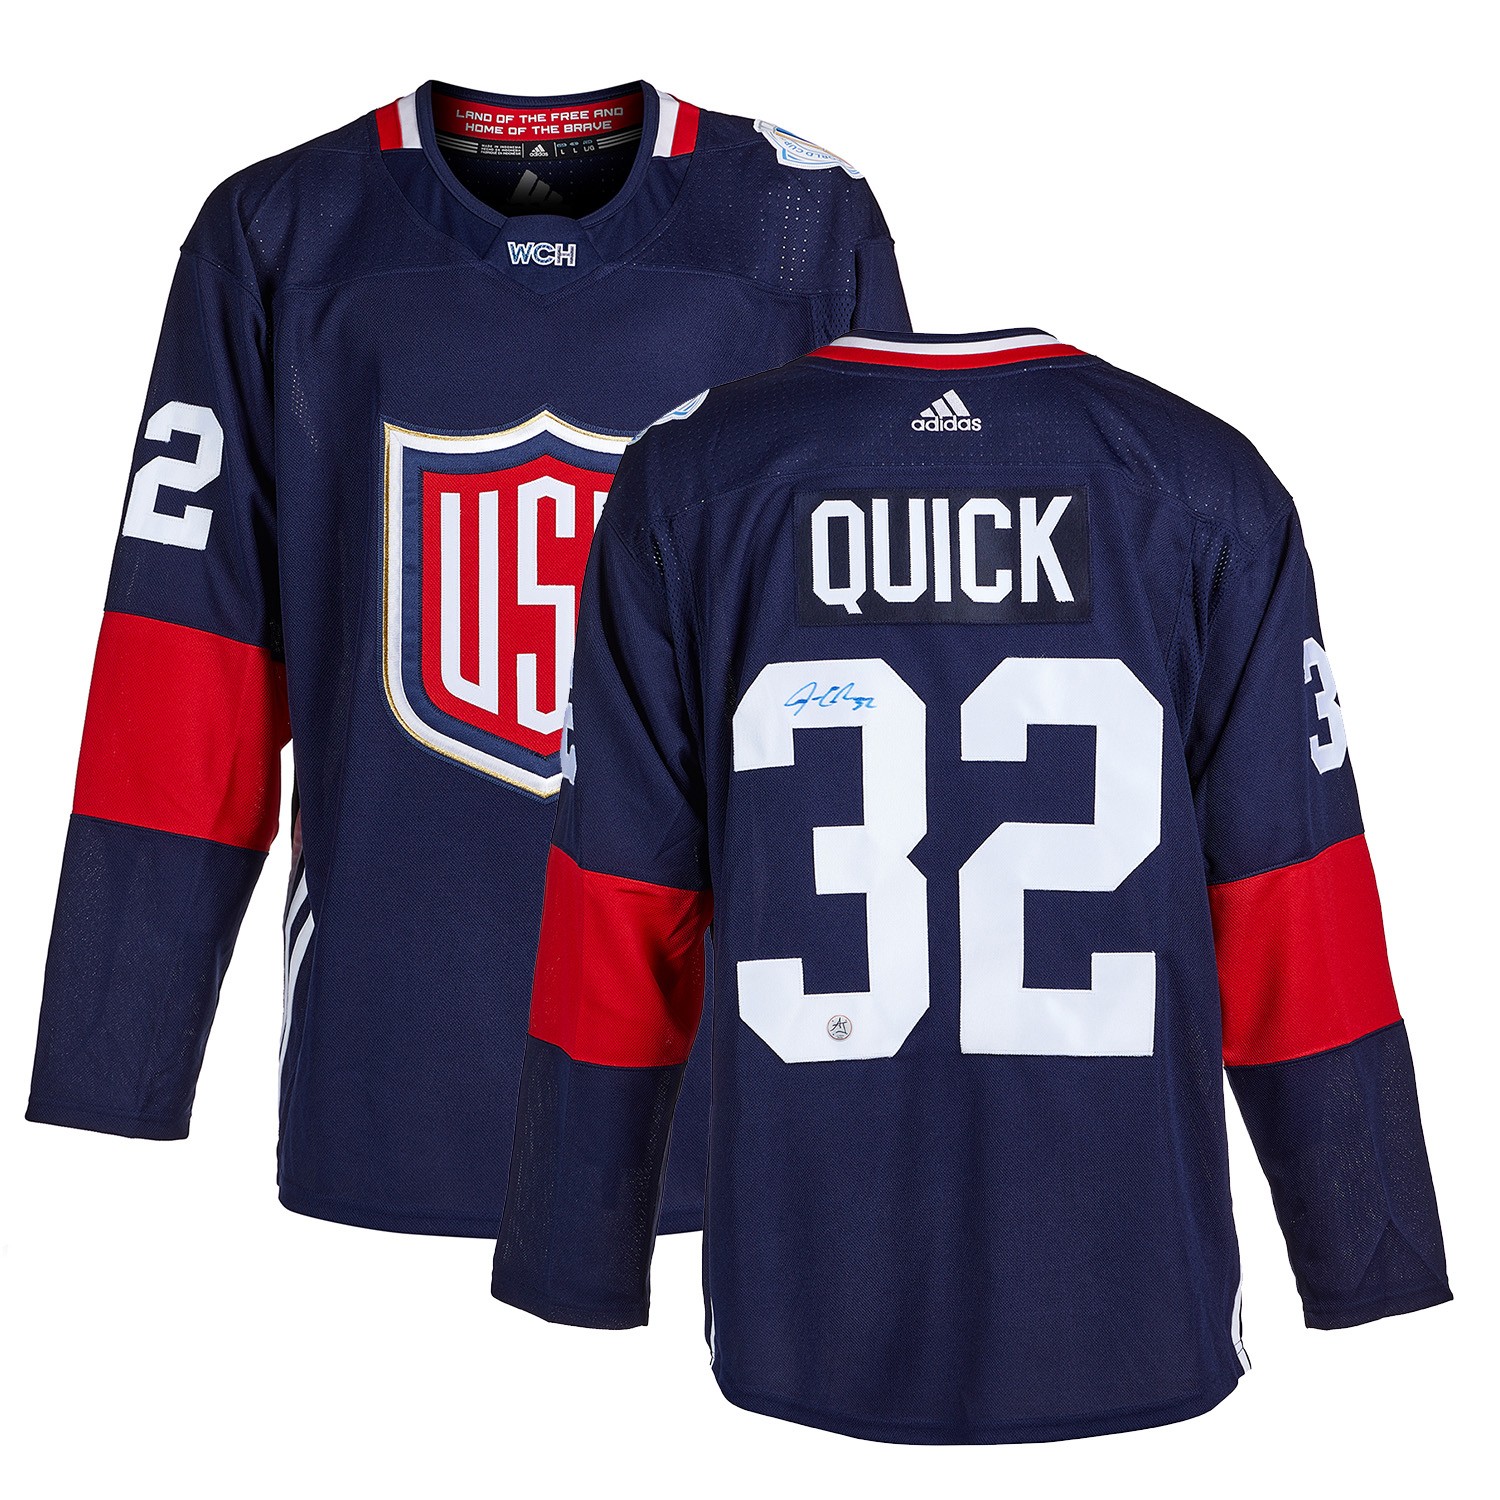 Jonathan Quick Team USA Autographed Signed 2016 World Cup of Hockey Adidas Jersey